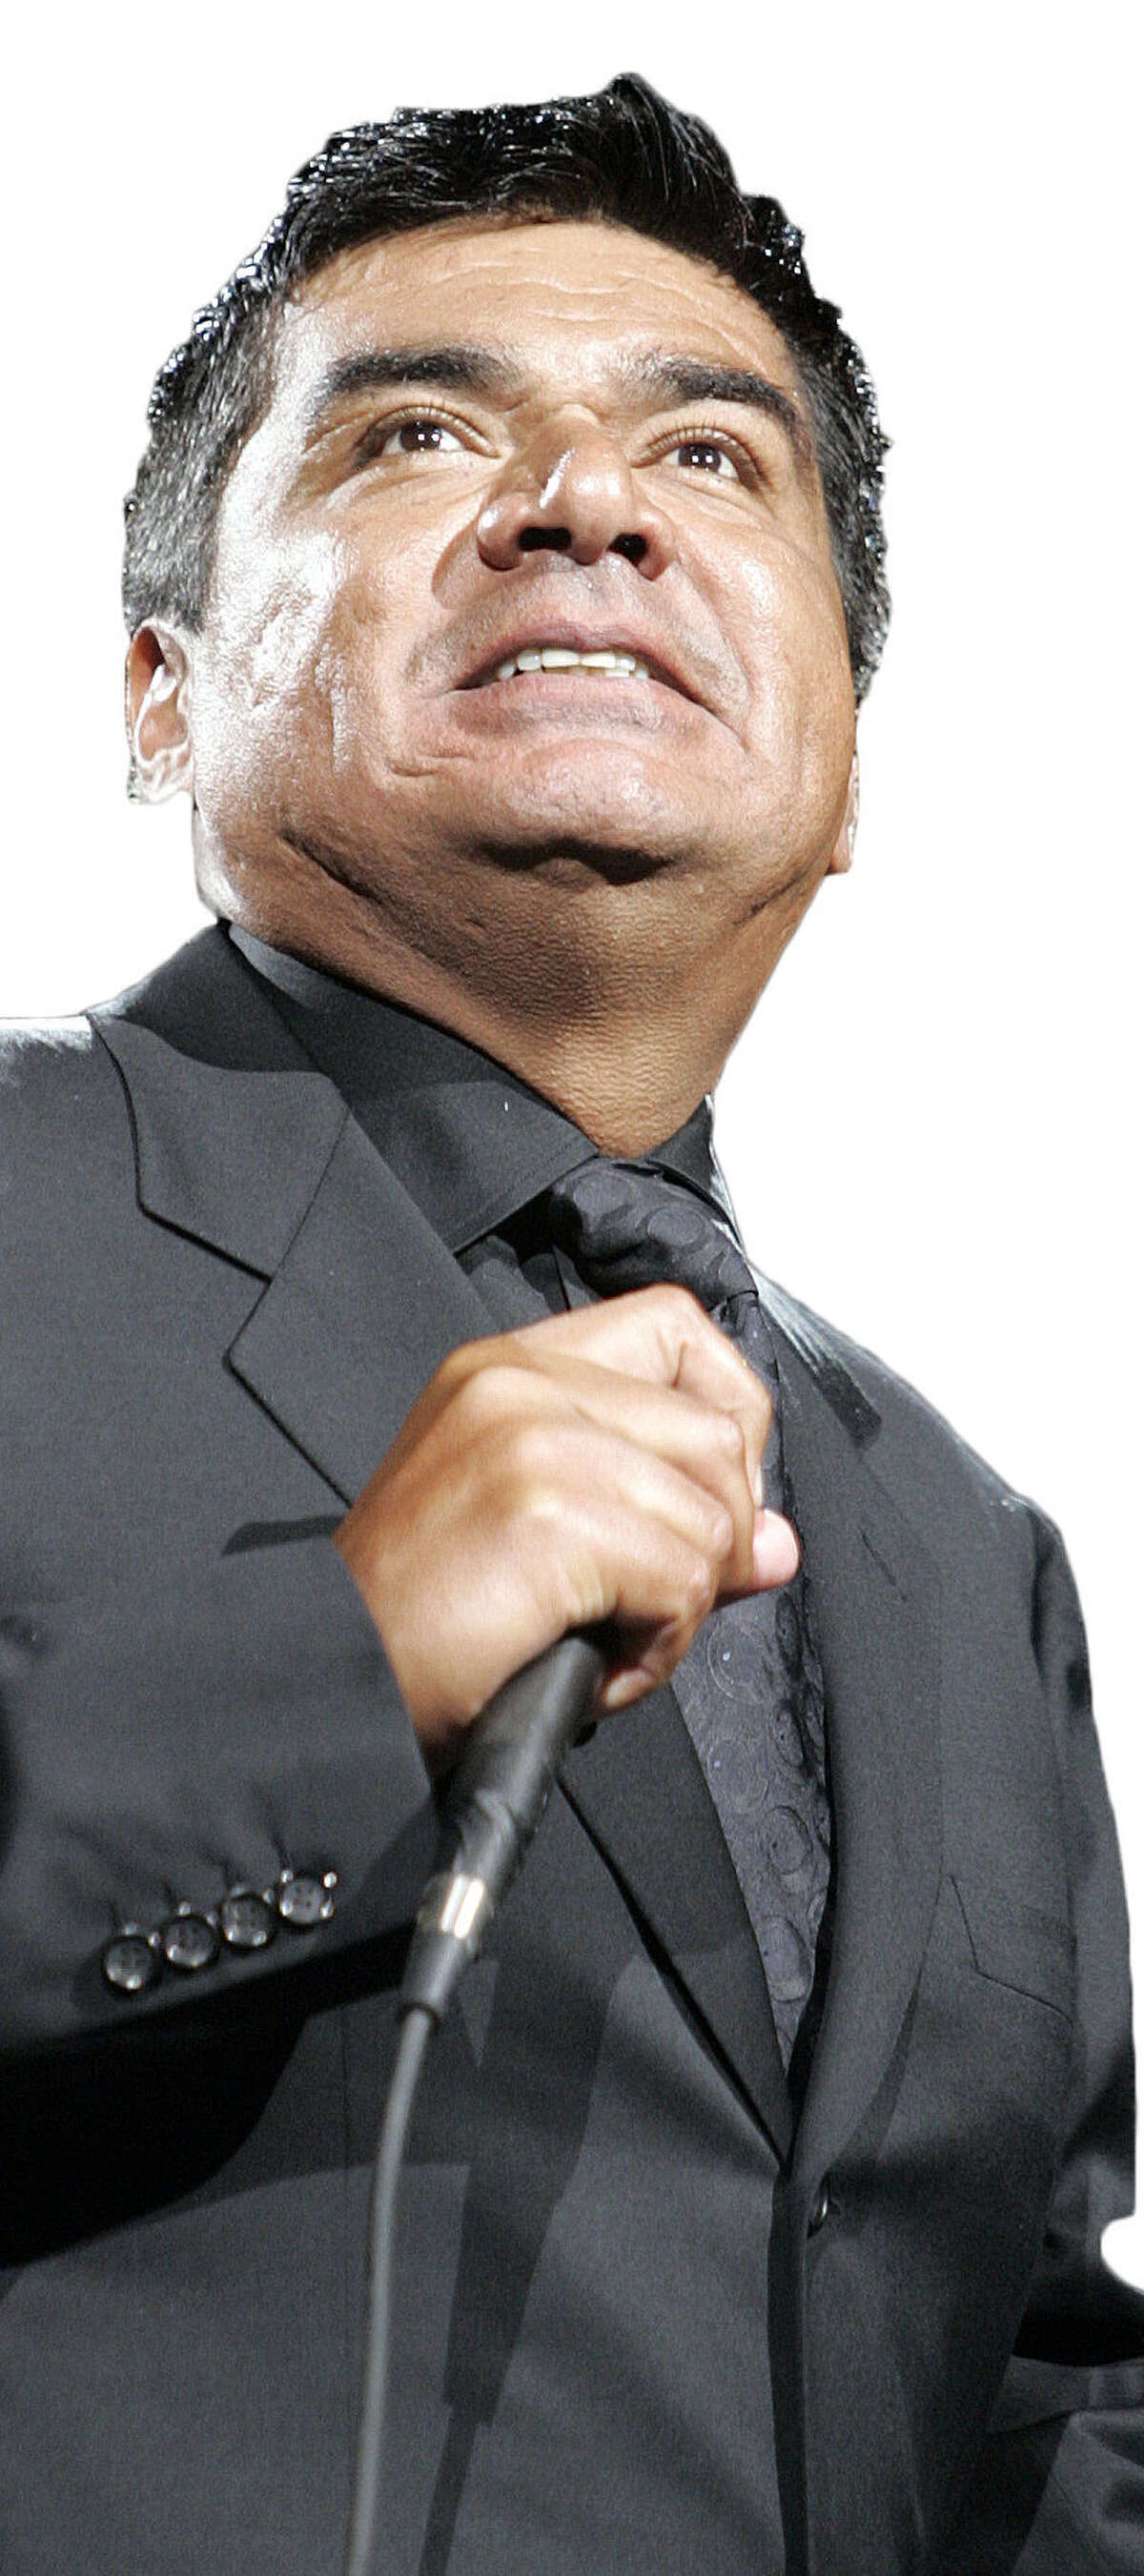 George Lopez is a frequent S.A. visitor and is scheduled for a return trip.